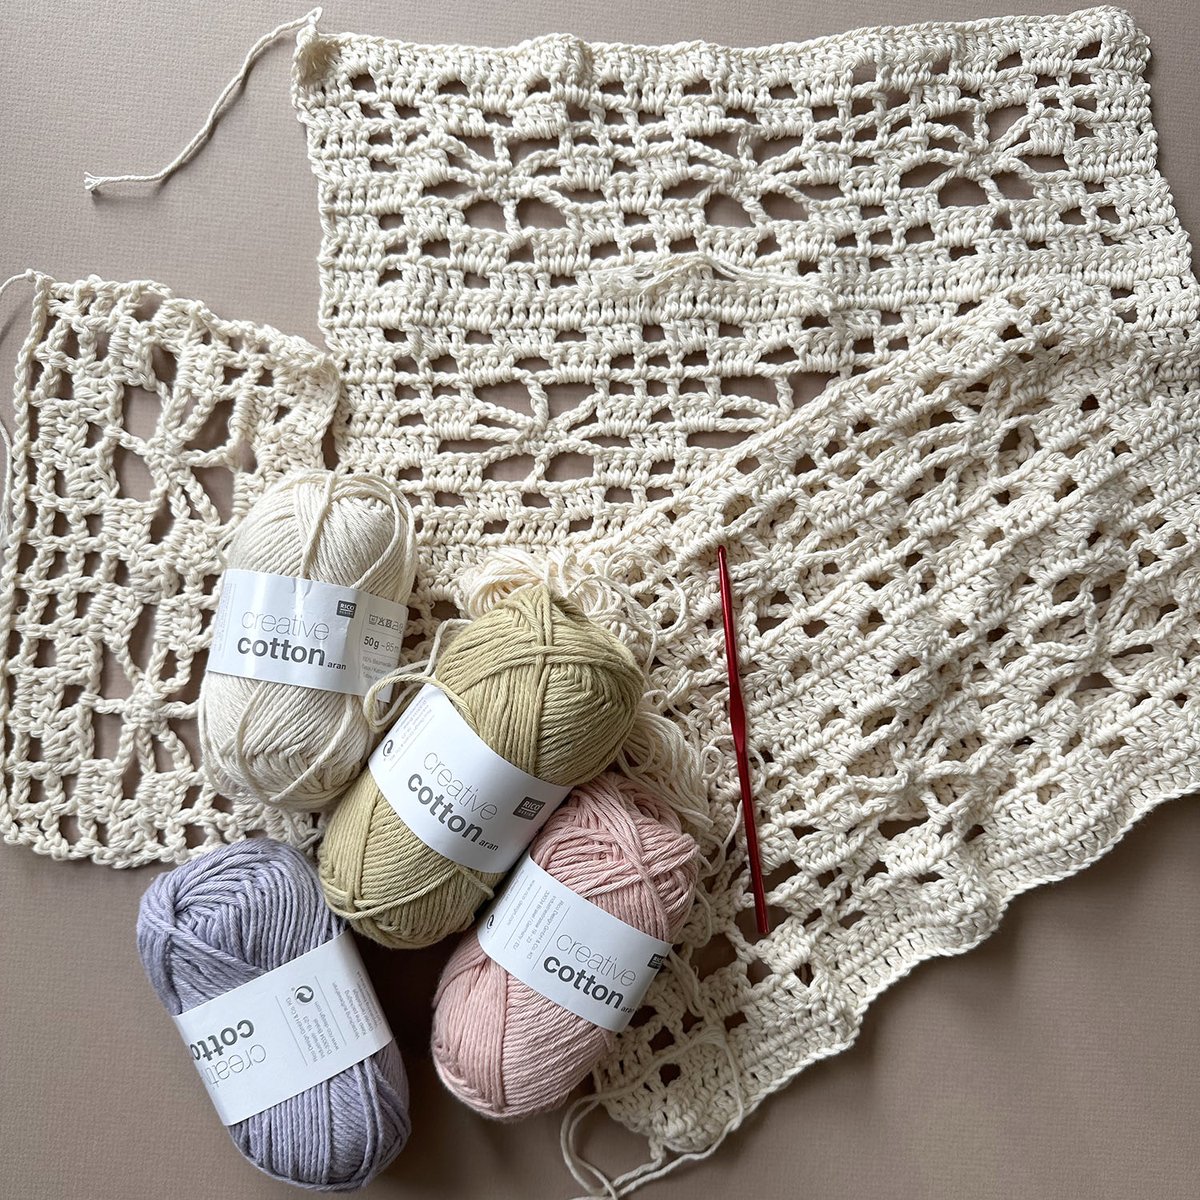 A WIP to share today from Black Sheep Helen. She is crocheting a top for her daughter in Rico Cotton Aran. Rather than following a pattern Helen is free styling a crochet stitch to make the top. We can't wait to see it finished! Shop Rico Cotton Aran - ow.ly/ag6H50RvH2Z